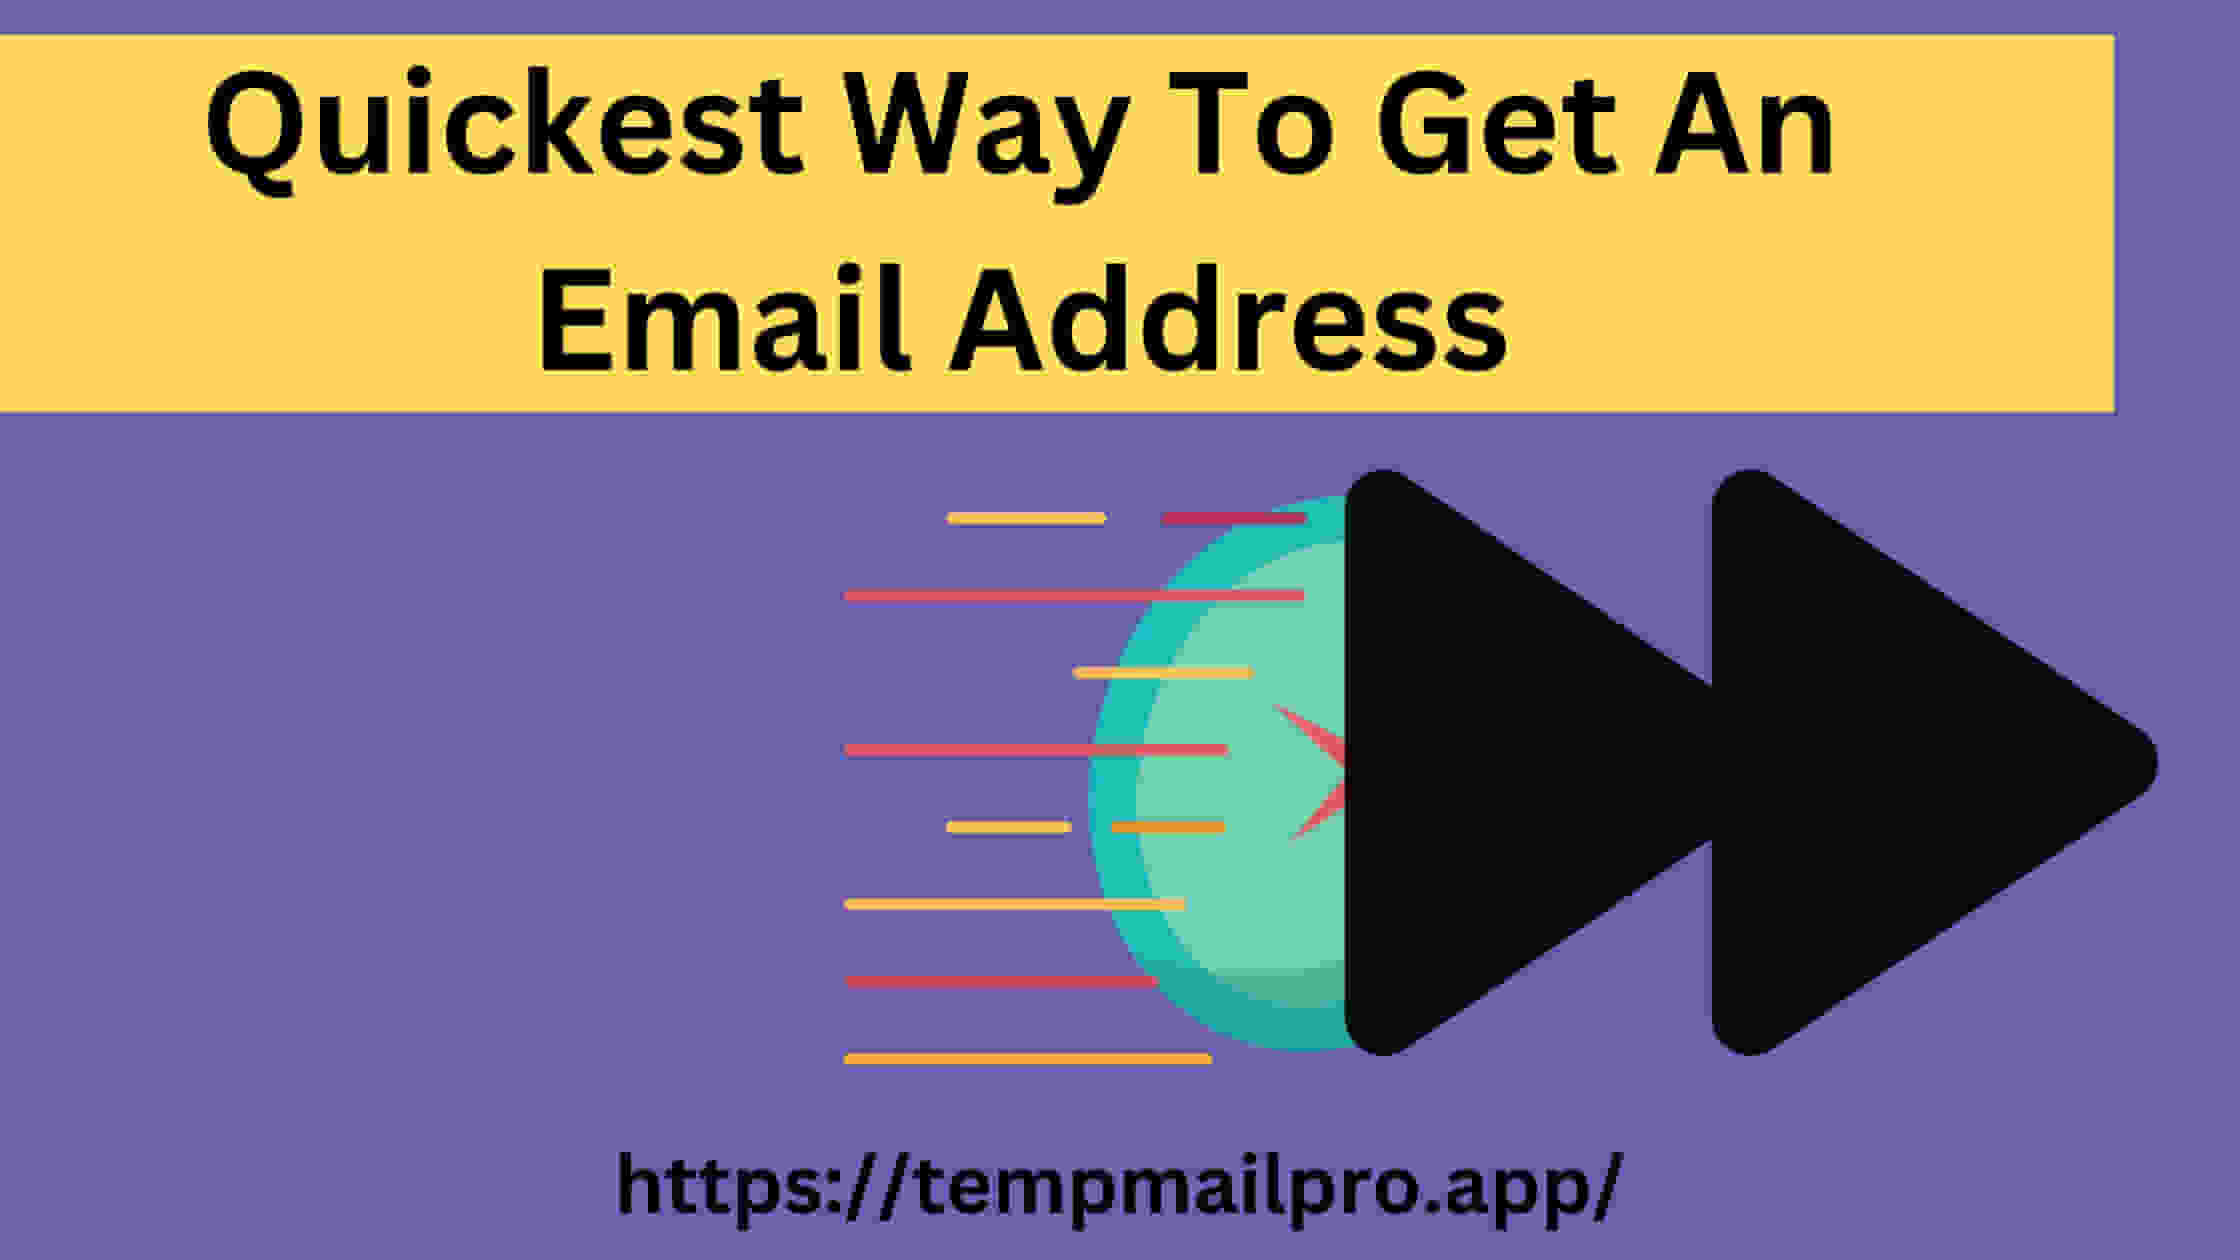 What Is The Easiest Quickest Way To Get An Email Address?